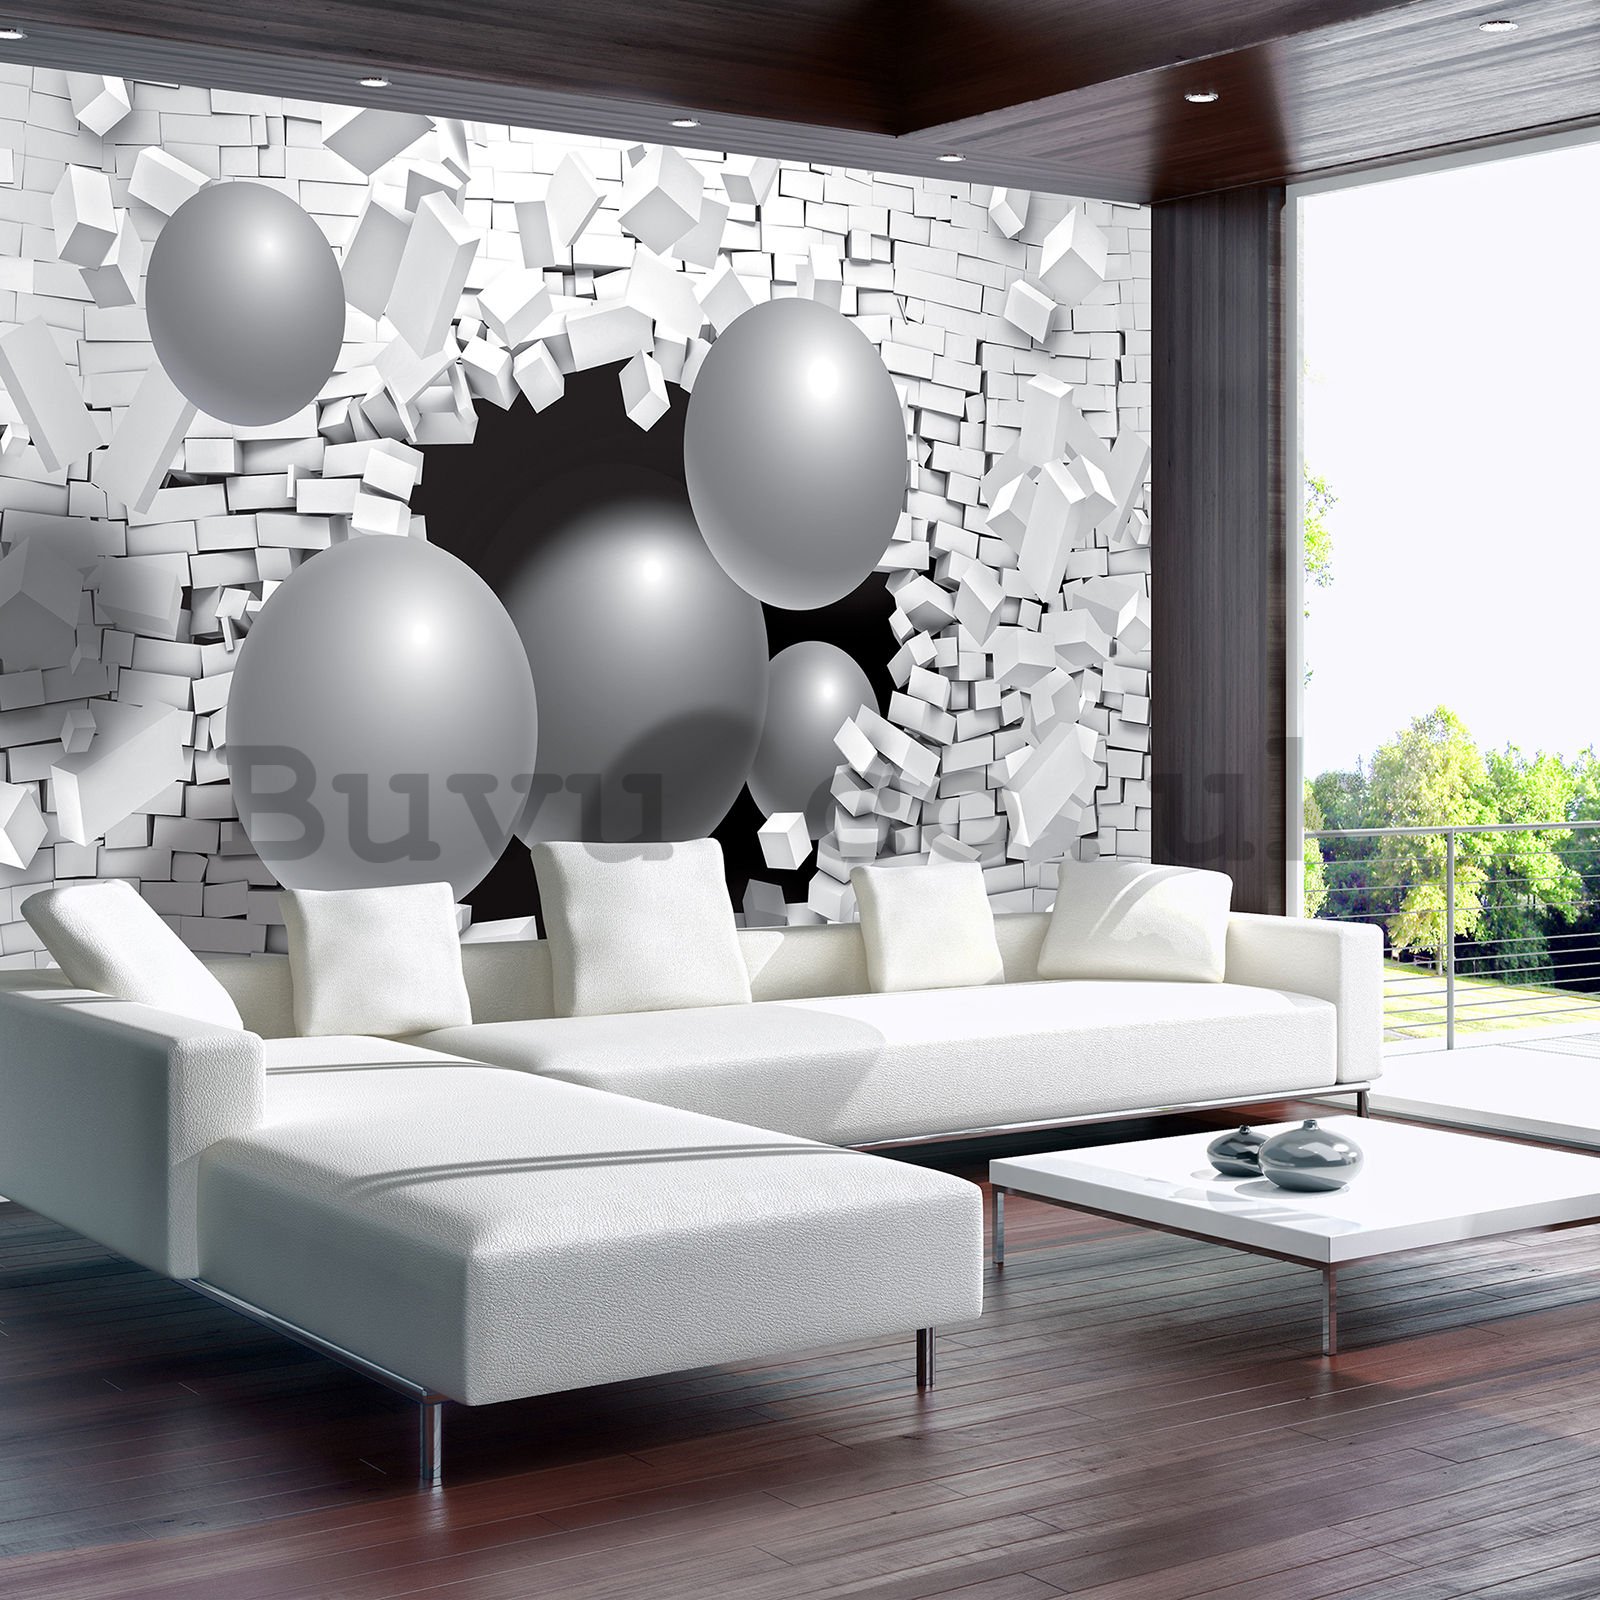 Wall mural: Spheres from a wall (1) - 254x184 cm